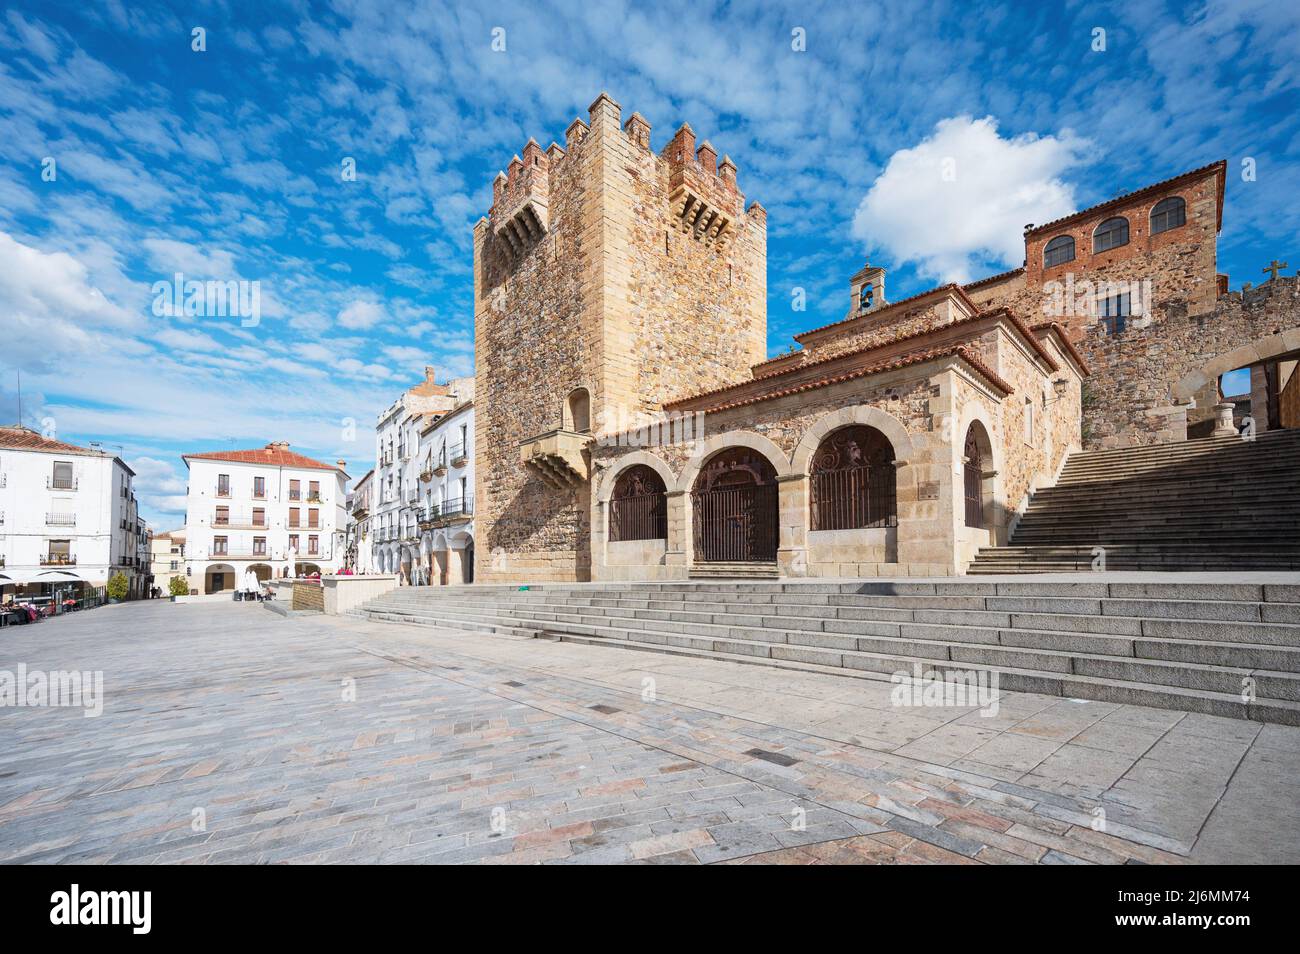 Panoramic view of Caceres, Extremadura, Spain. High quality photo. Stock Photo